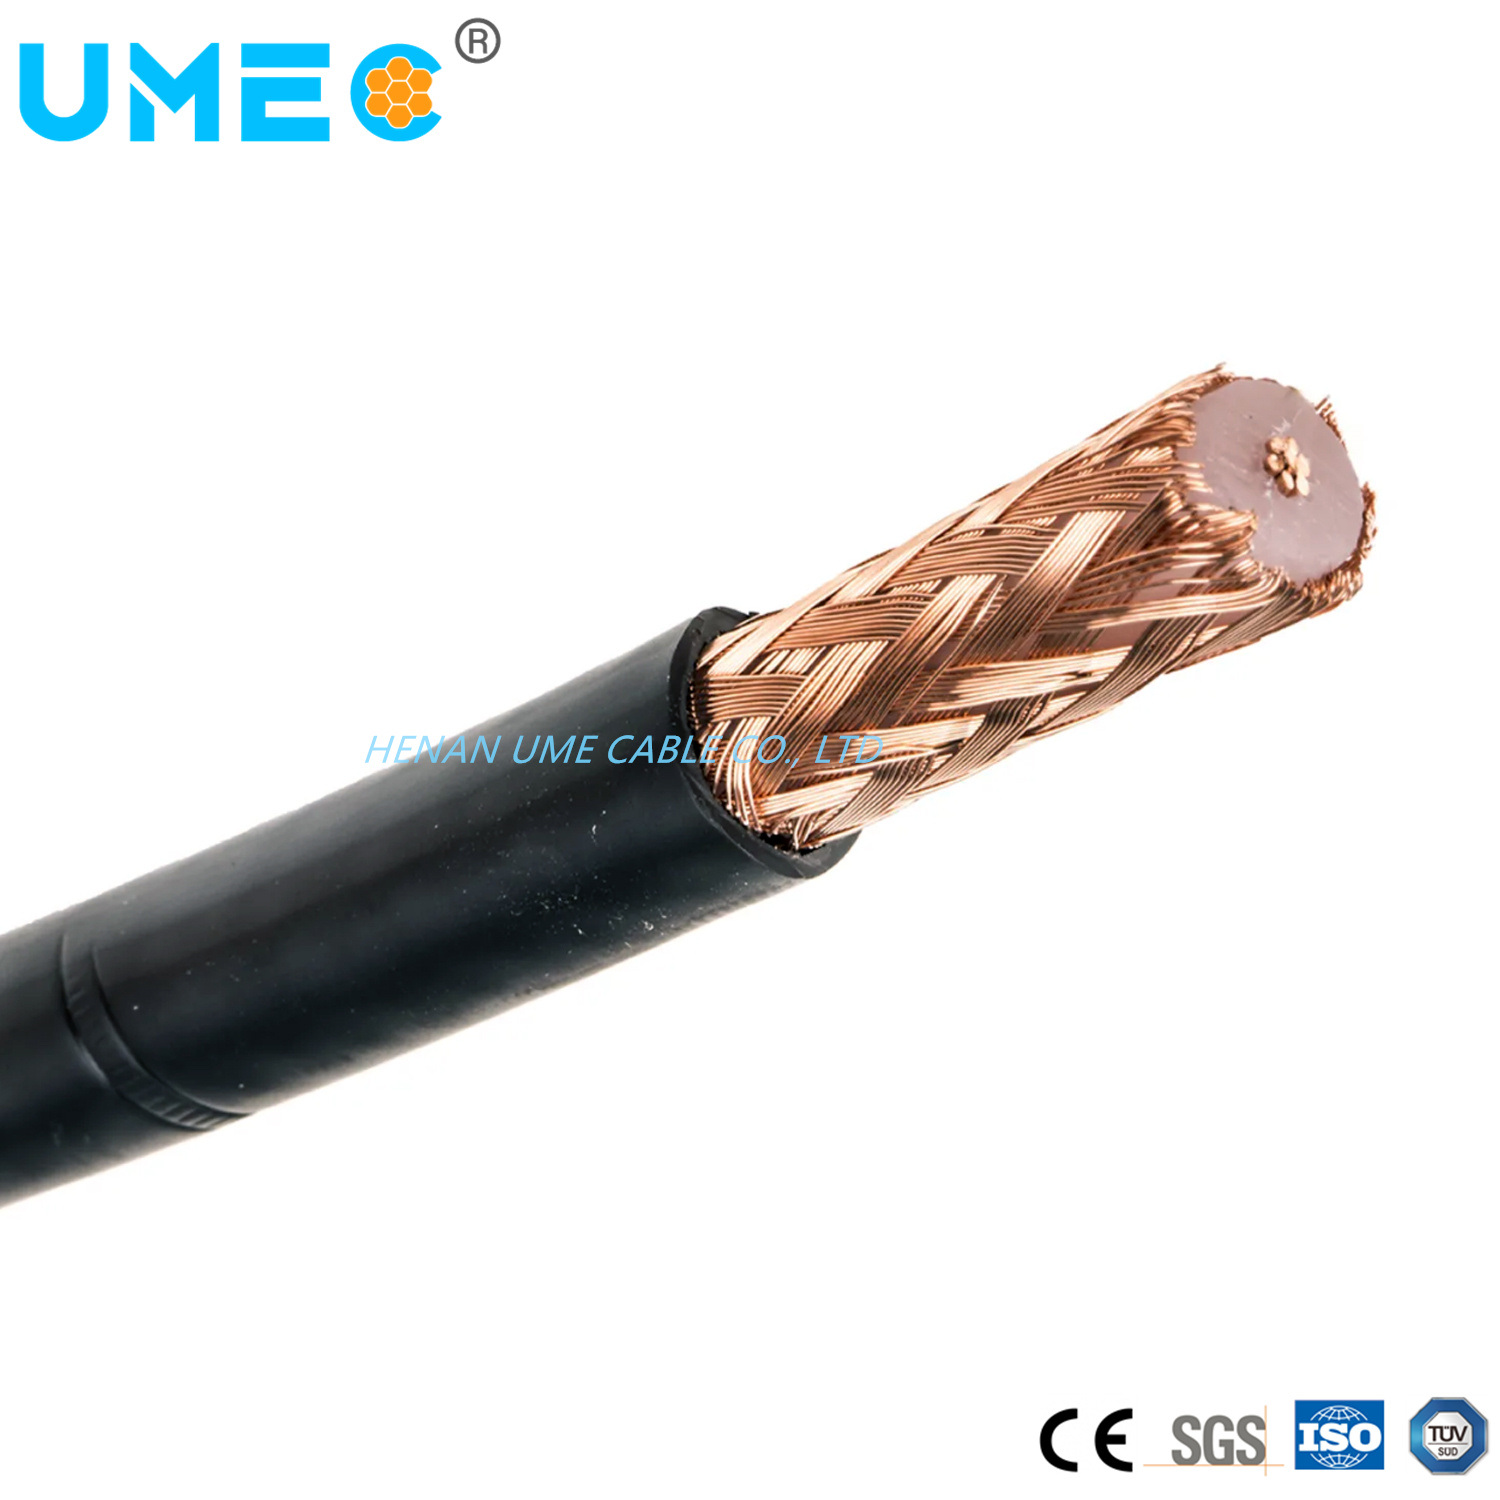 Wholesale CCTV Telecommunication Cable Rg59 Silver-Coated Copper Conductor Braiding Cable Coaxial Cable